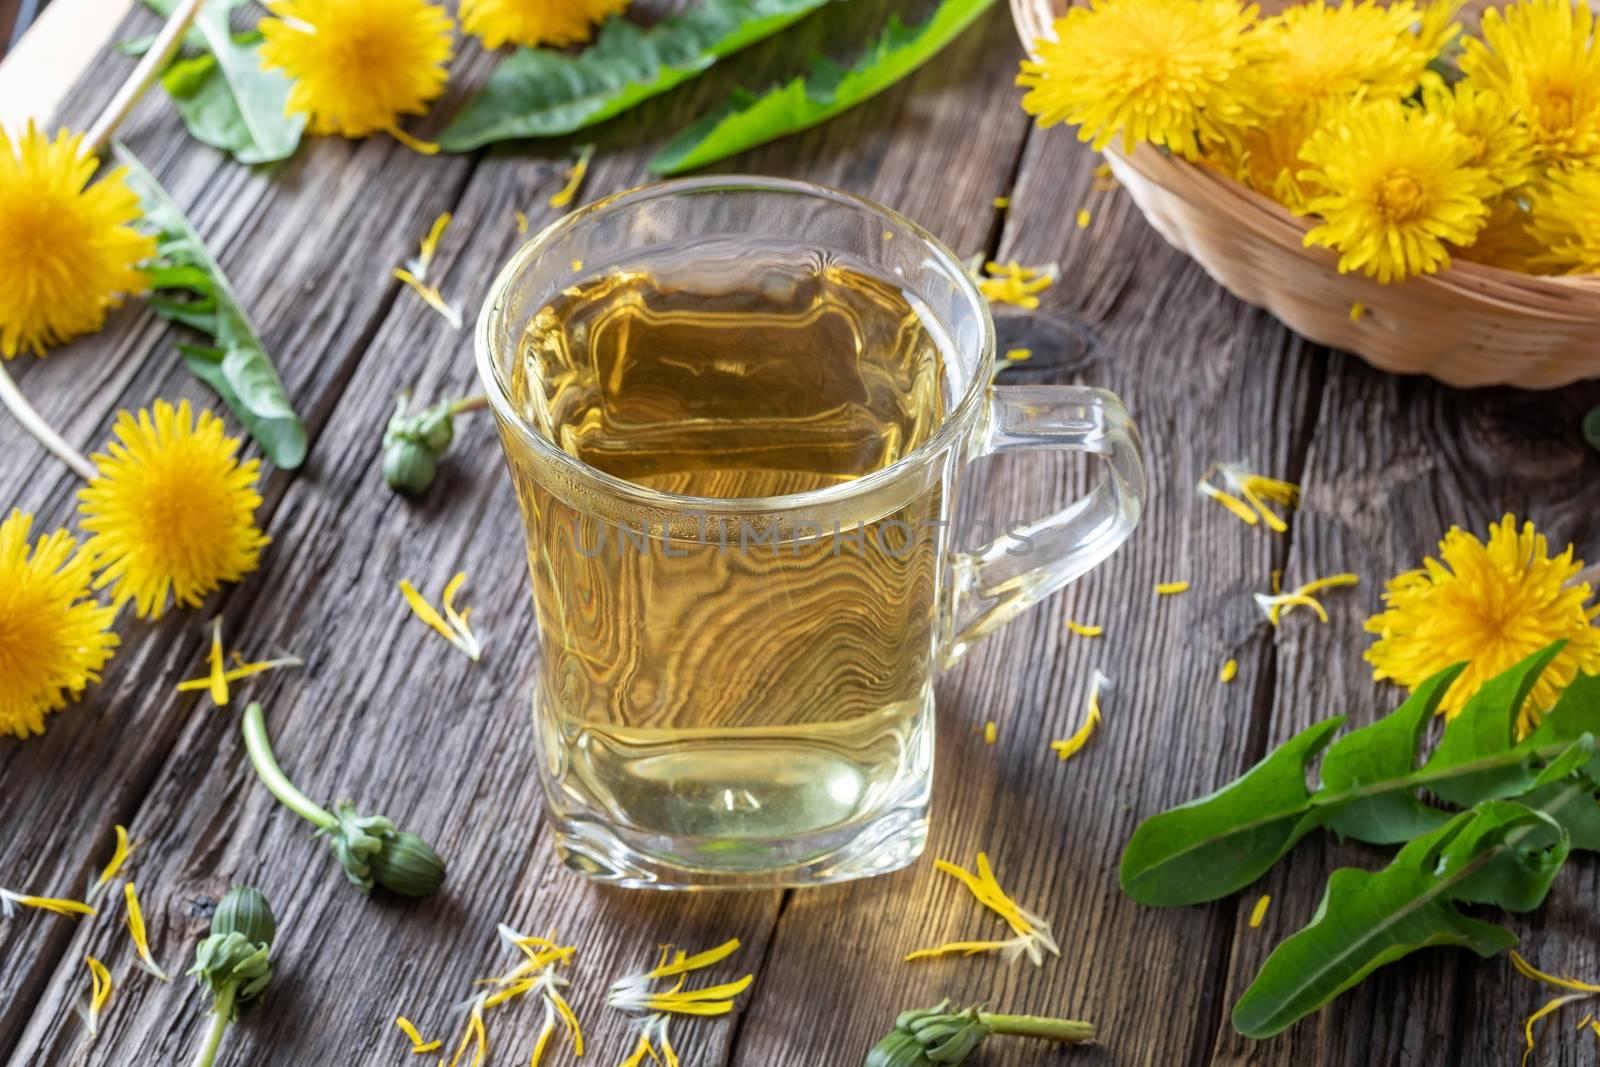 A cup of herbal tea with fresh dandelion flowers and leaves